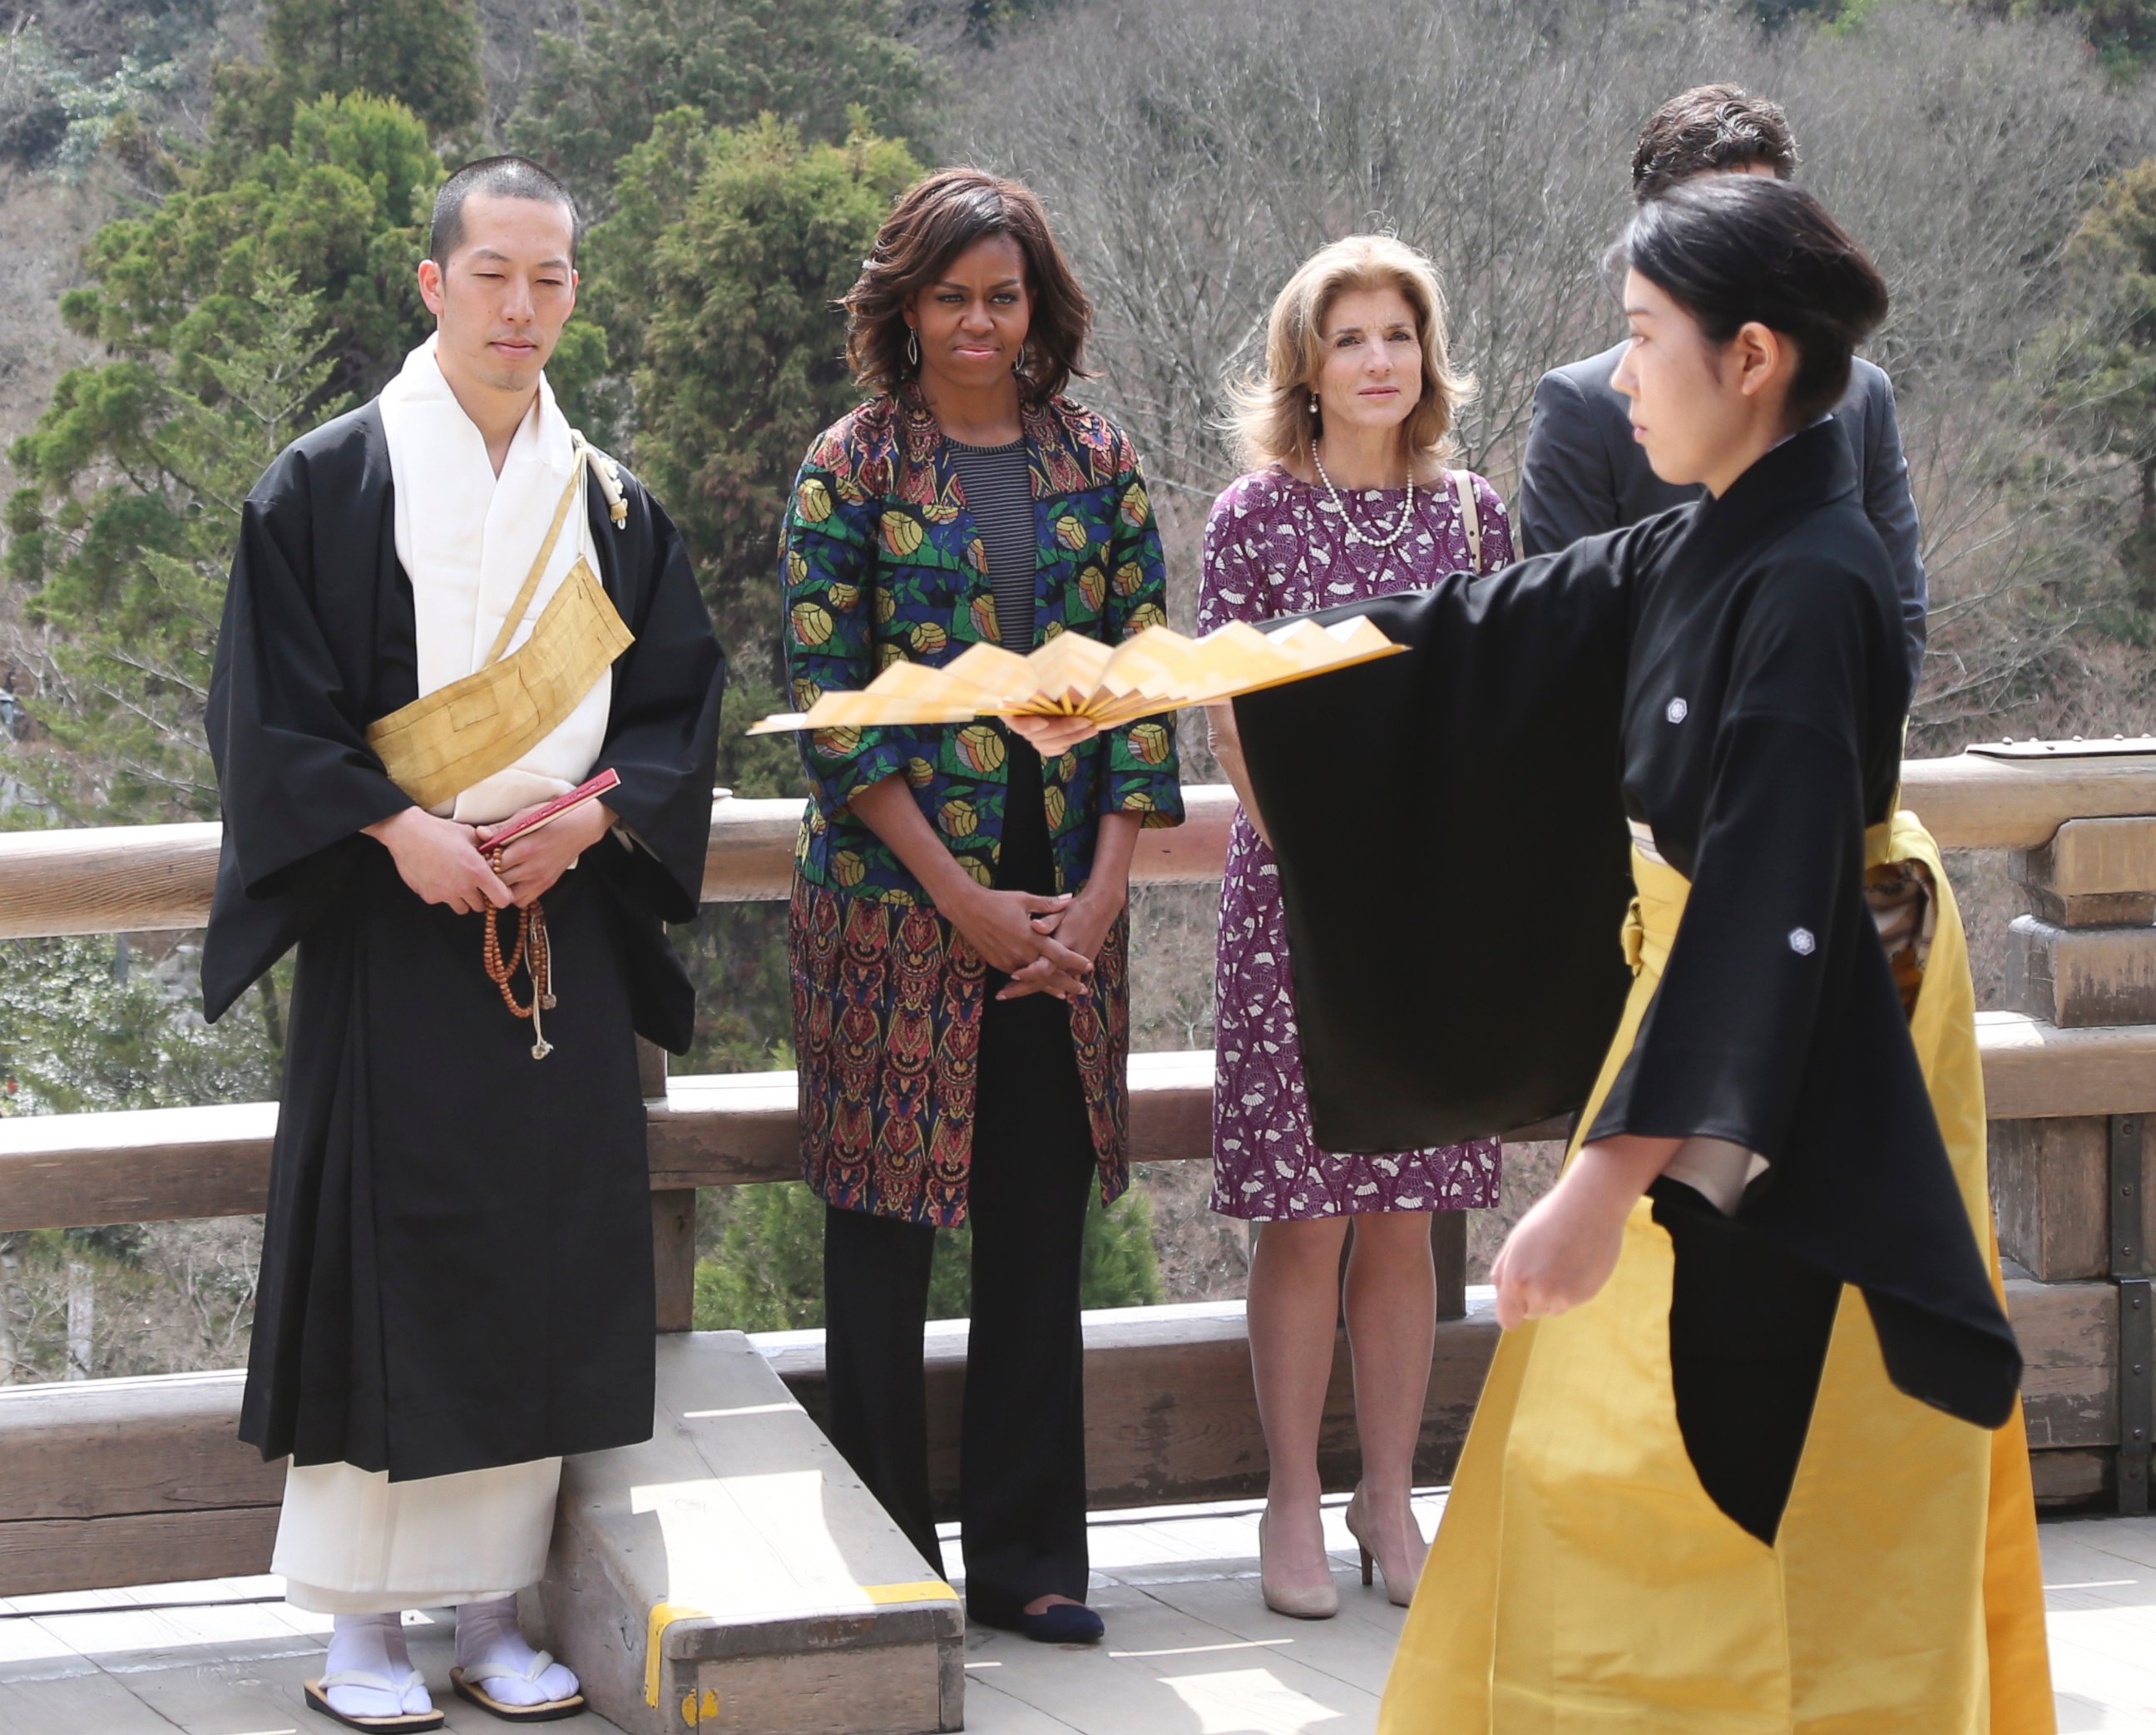 PHOTO: First lady Michelle Obama watches a Noh performance by college students, with monk of Kiyomizu-dera Buddhist temple Eigen Onishi, left, and U.S. Ambassador to Japan Caroline Kennedy, second from right, at the temple in Kyoto, Japan, March 20, 2015.